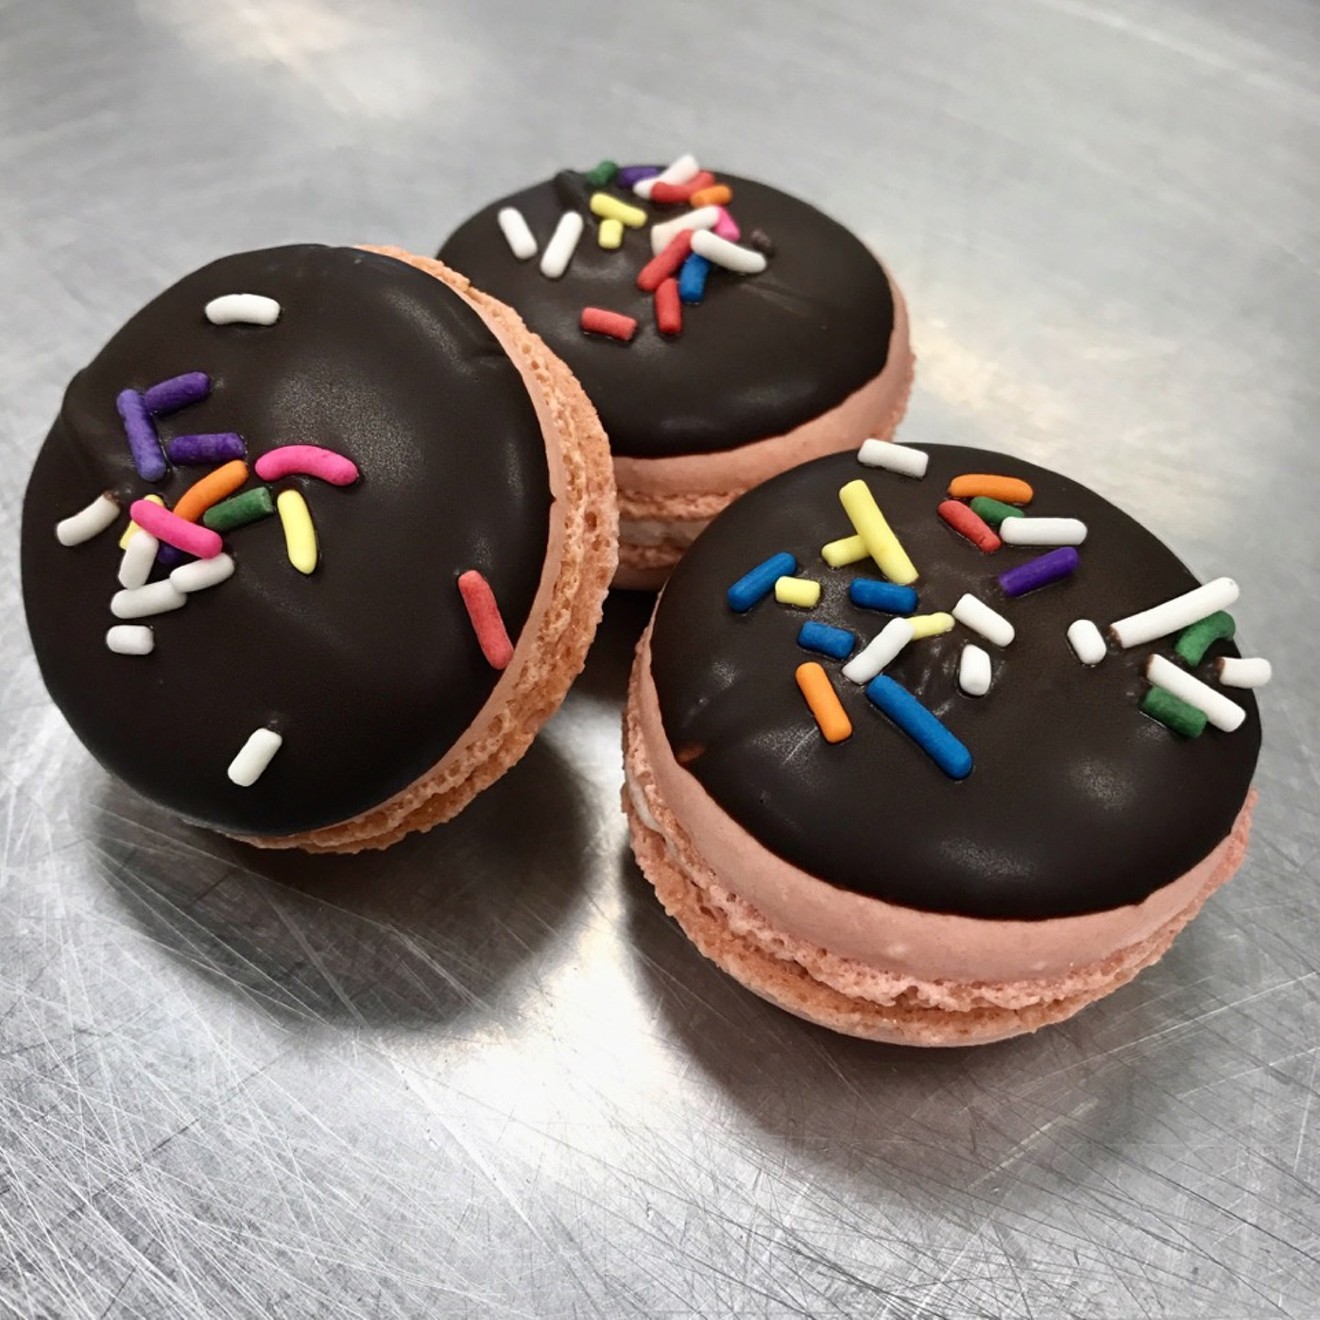 Bisous Bisous Patisserie is giving away one free banana split macaron all day today in honor of National Macaron Day.